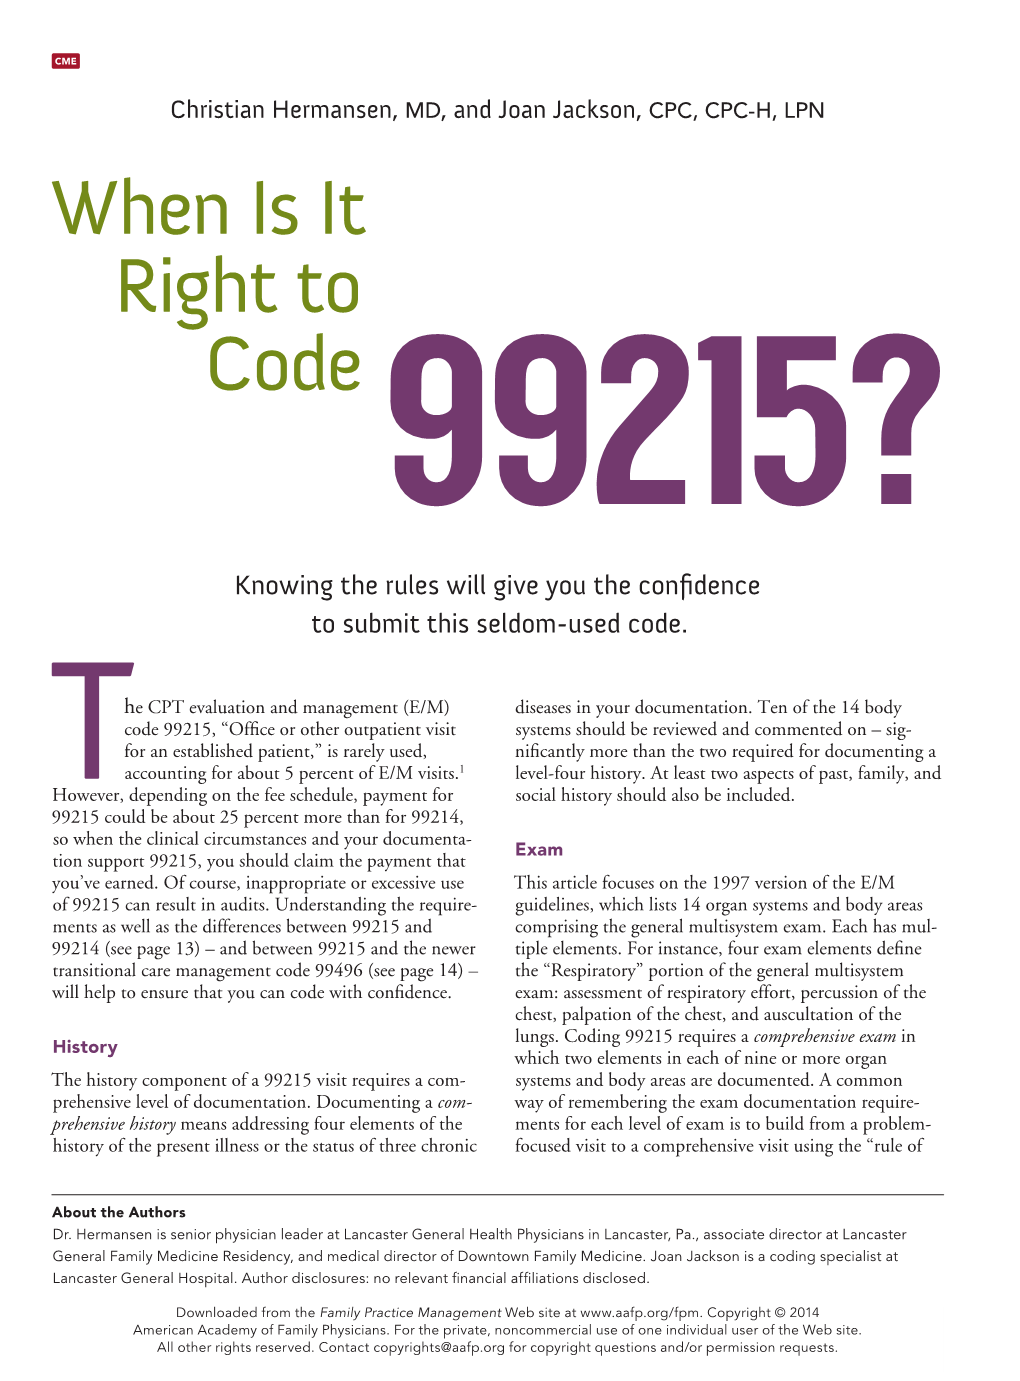 When Is It Right to Code 99215?